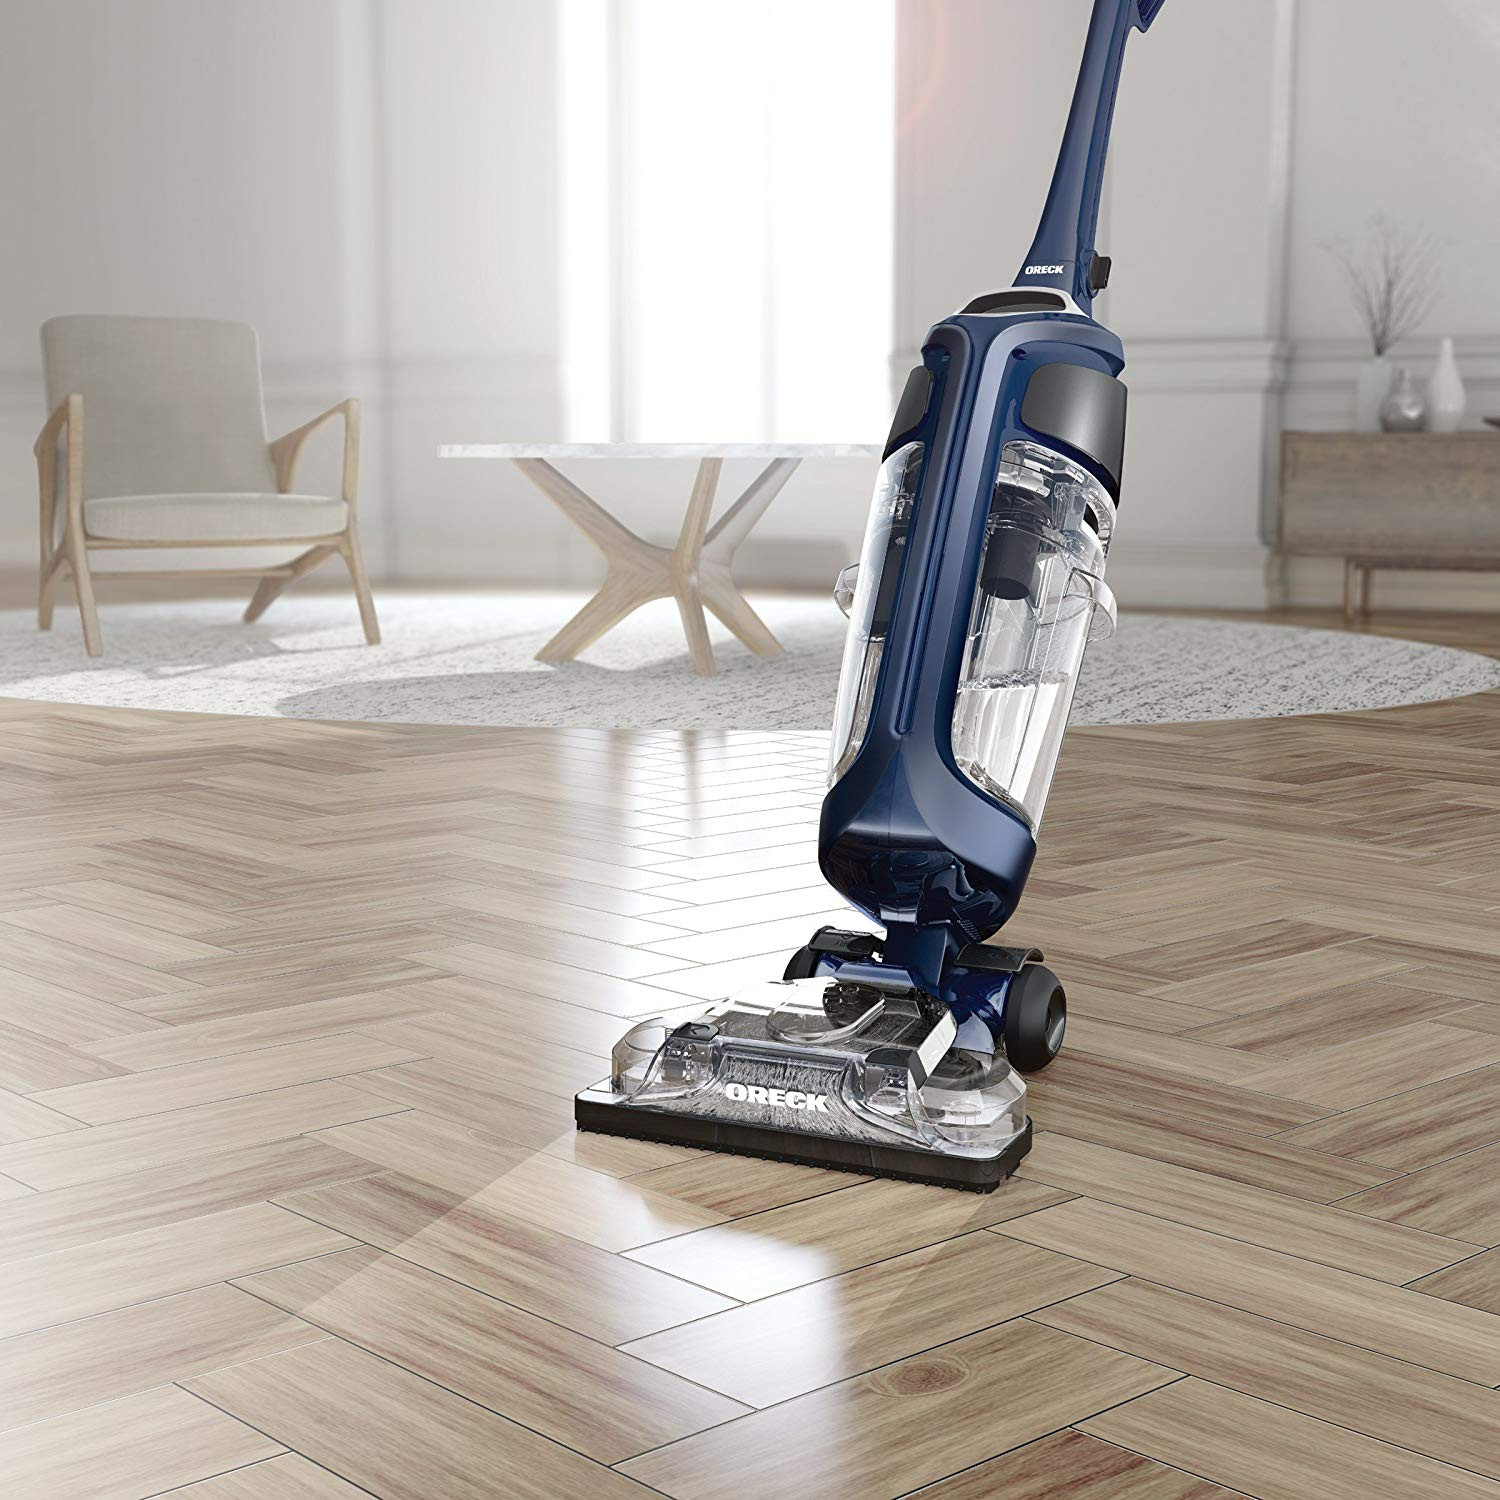 20 Popular Hardwood Floor Steam Cleaners Consumer Reports 2024 free download hardwood floor steam cleaners consumer reports of amazon com oreck surface scrub hard floor cleaner corded home throughout amazon com oreck surface scrub hard floor cleaner corded home kitch